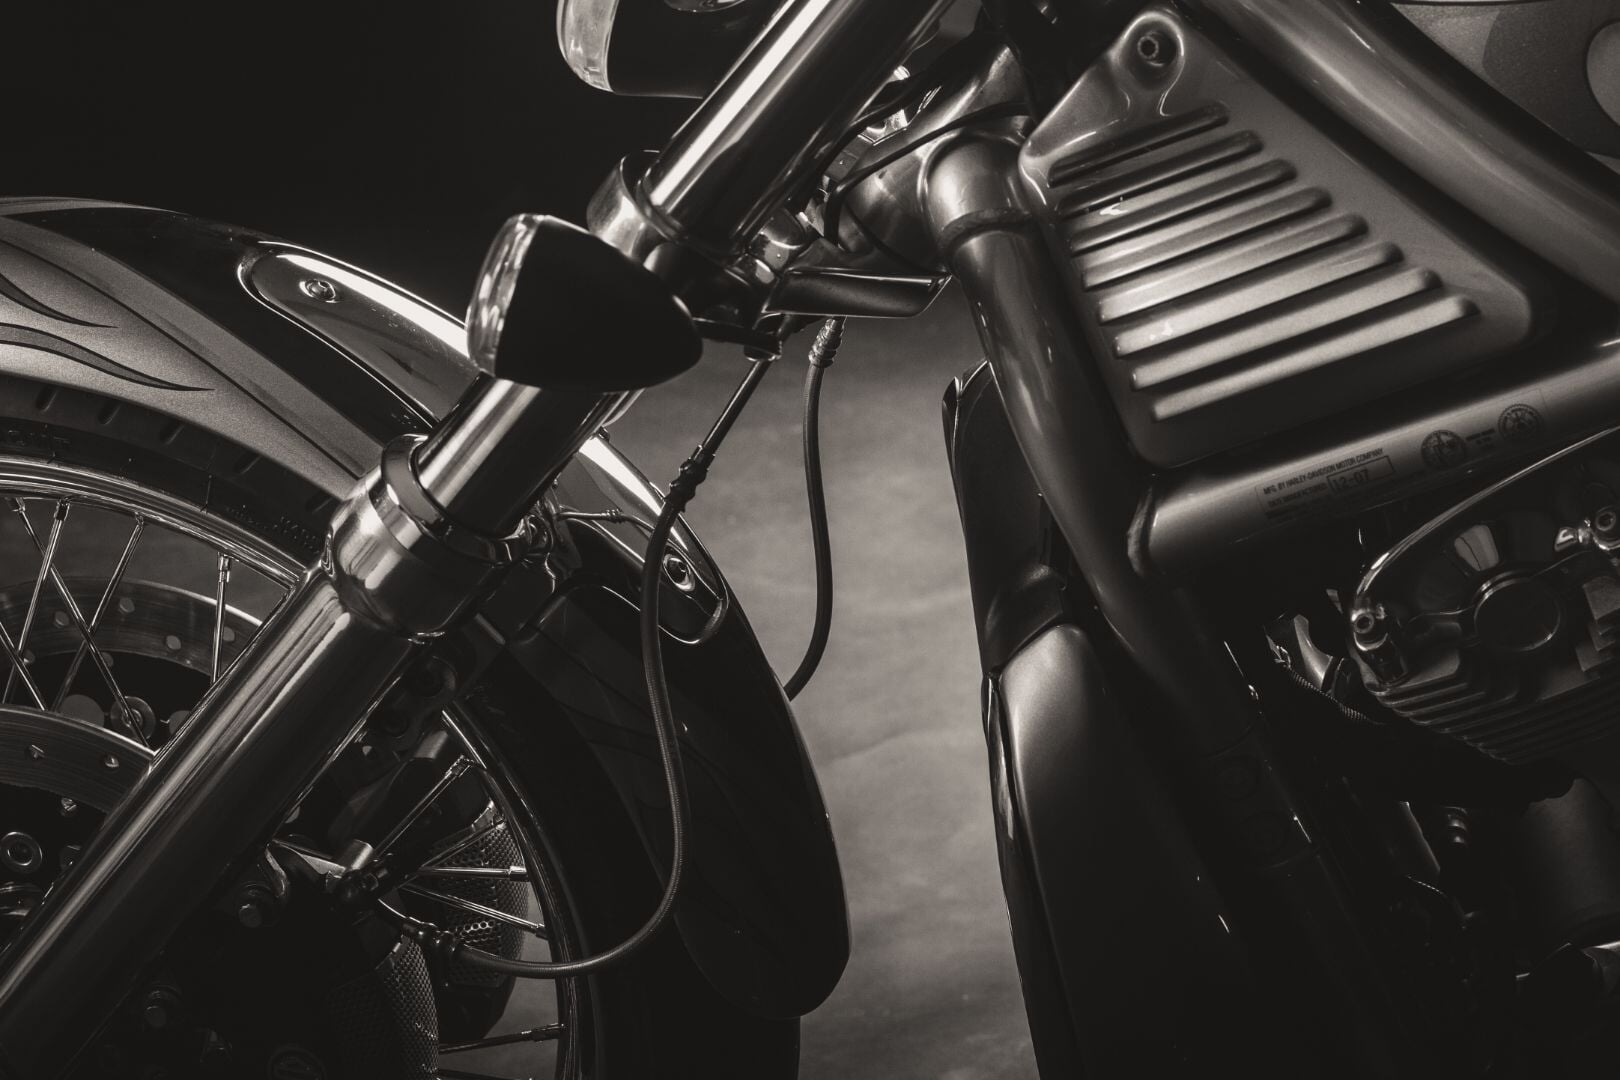 A closeup of a Harley V-Rod front end shows the front-wheel's cover, the twin forks, and headlights—all in black.